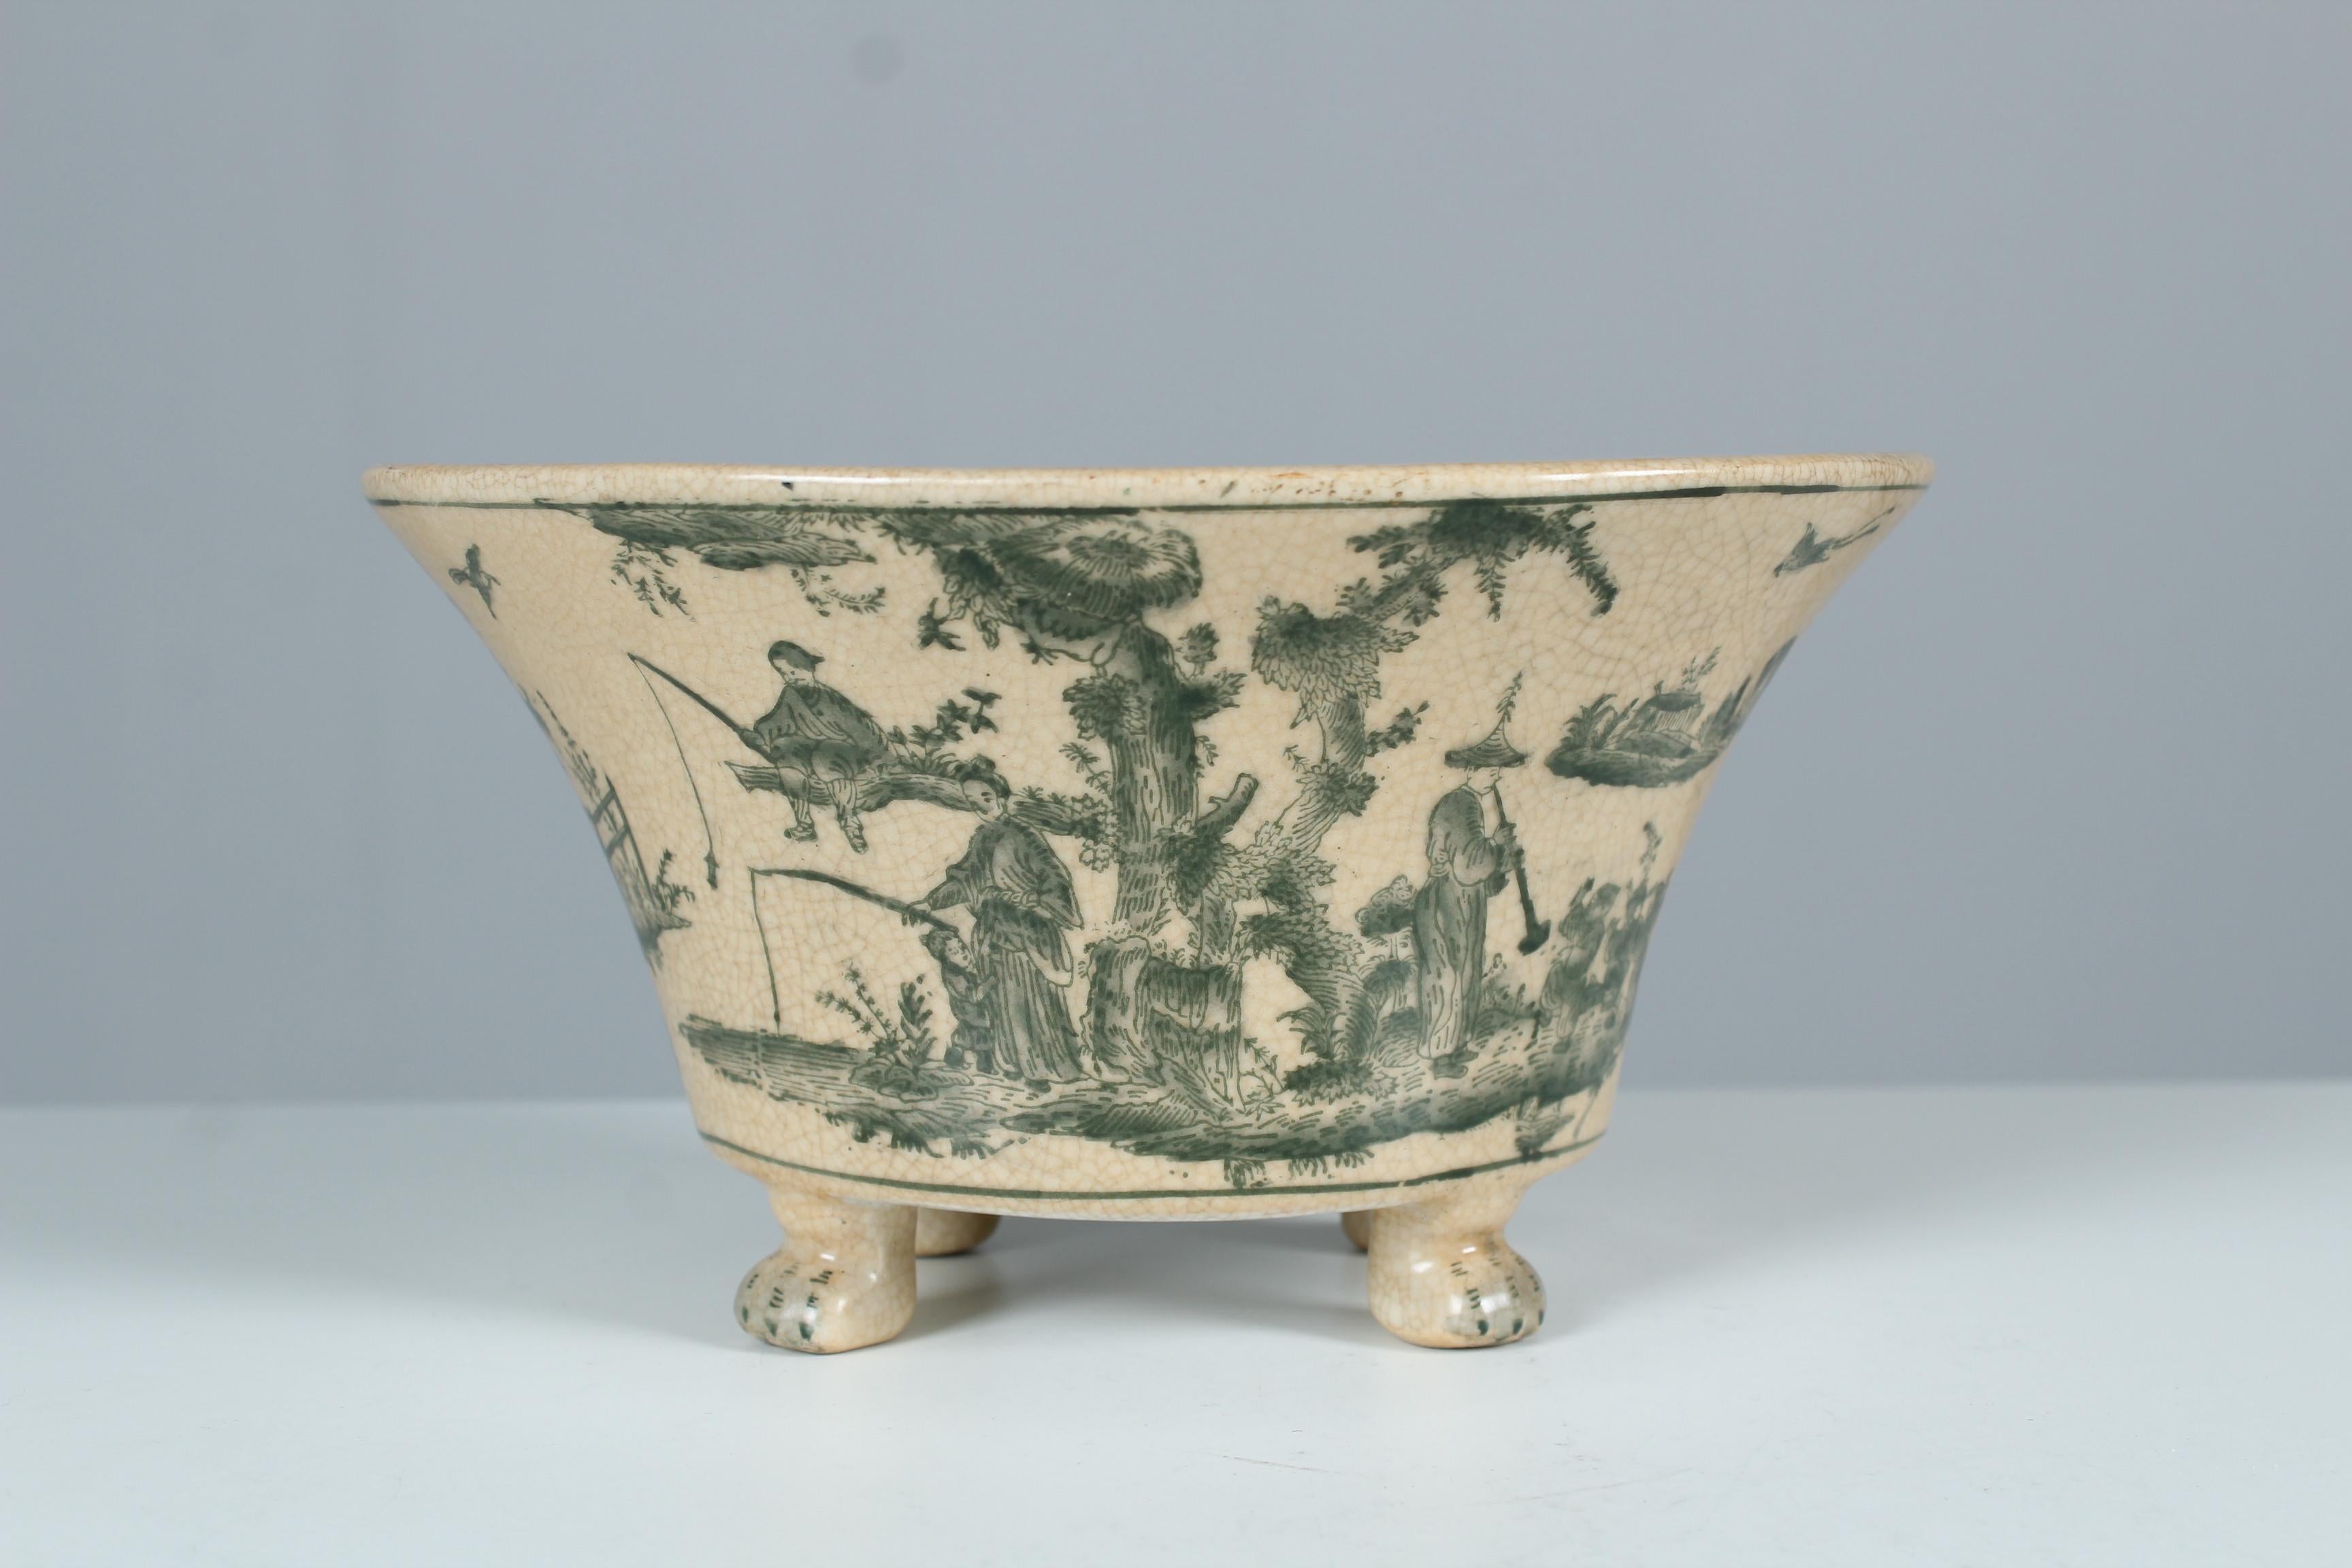 Antique jardiniere from G&C Interiors Denmark made of porcelain. Beautifully hand painted with various Chinese motifs, children playing and anglers in a setting with trees and a lake. For this purpose, a beautiful harmonious shade of green was used.